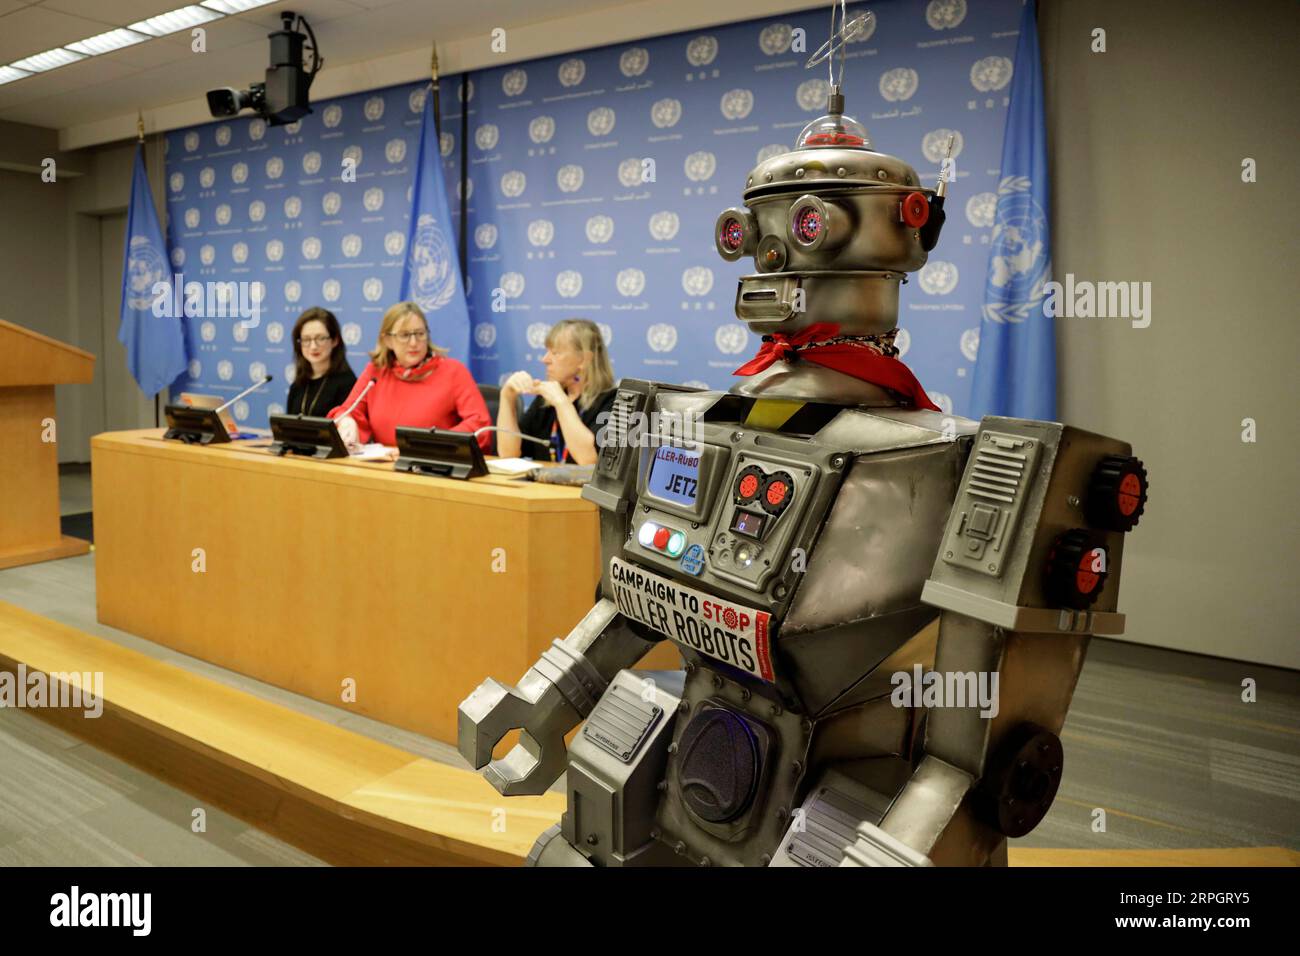 191021 -- UNITED NATIONS, Oct. 21, 2019 -- A robot is pictured at a press conference on the Campaign to Stop Killer Robots, at the UN headquarters in New York, Oct. 21, 2019. Mary Wareham, global coordinator of the Campaign to Stop Killer Robots, on Monday urged the international community to stop developing lethal autonomous weapons systems, or killer robots.  UN-STOP KILLER ROBOTS-PRESS CONFERENCE LixMuzi PUBLICATIONxNOTxINxCHN Stock Photo